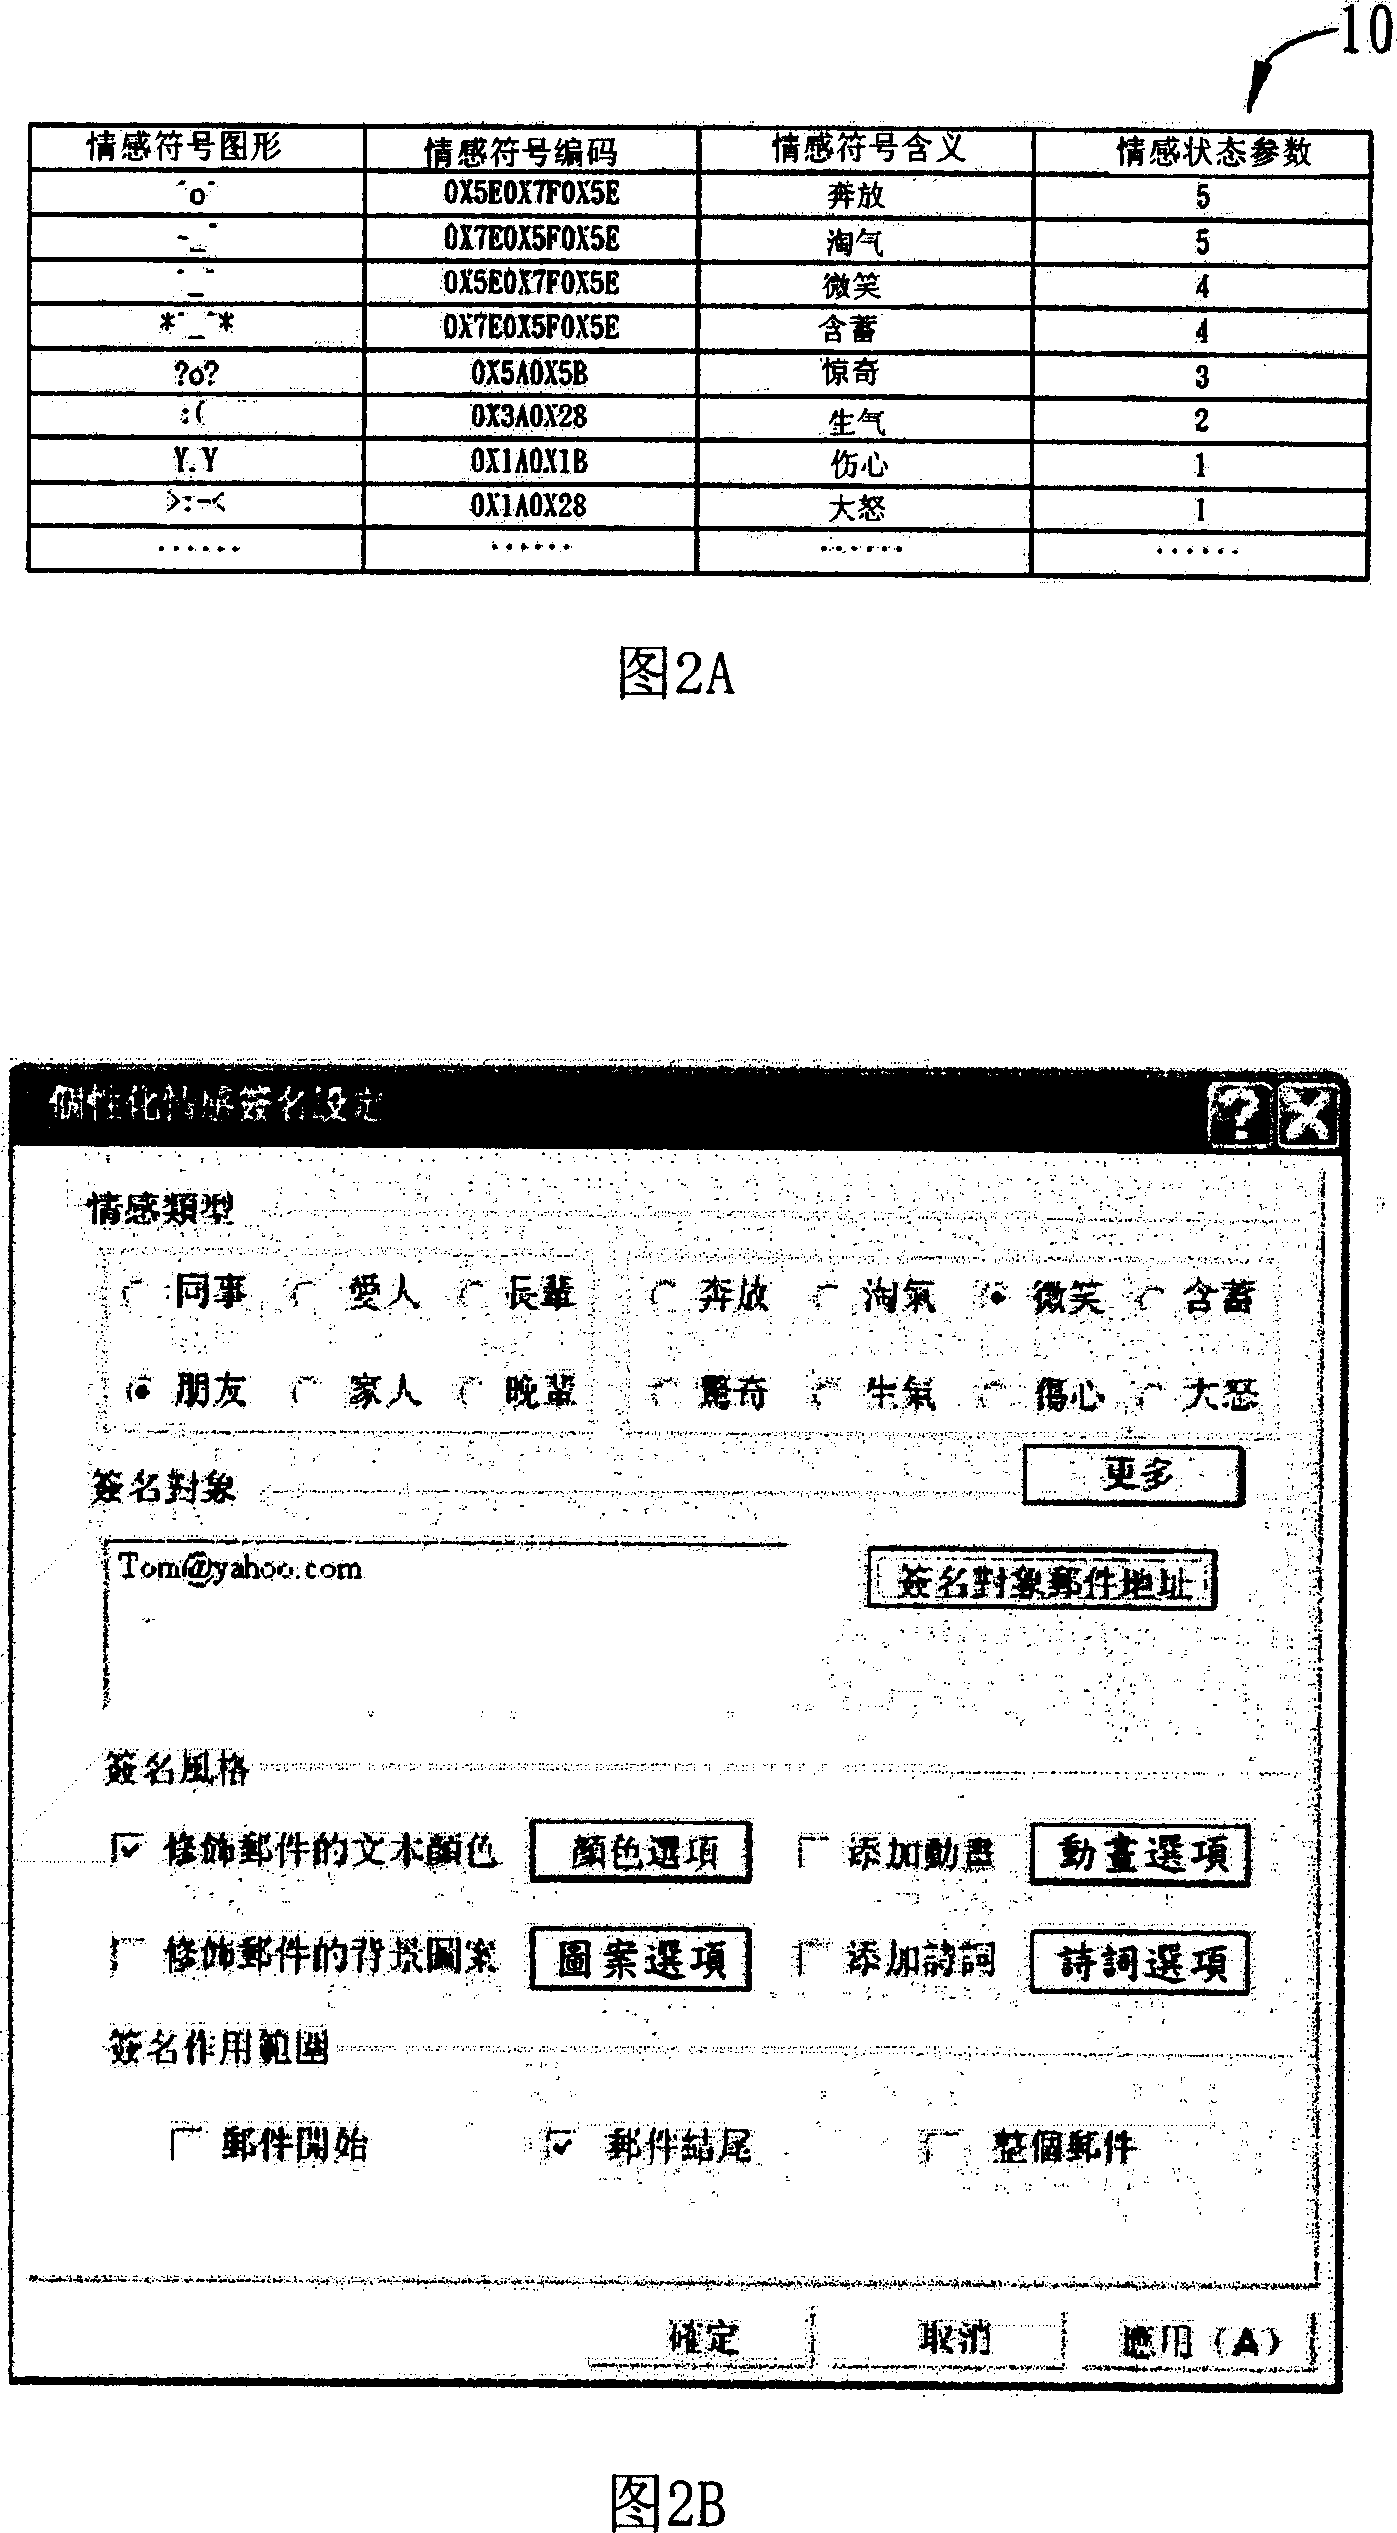 Mail editing system and method